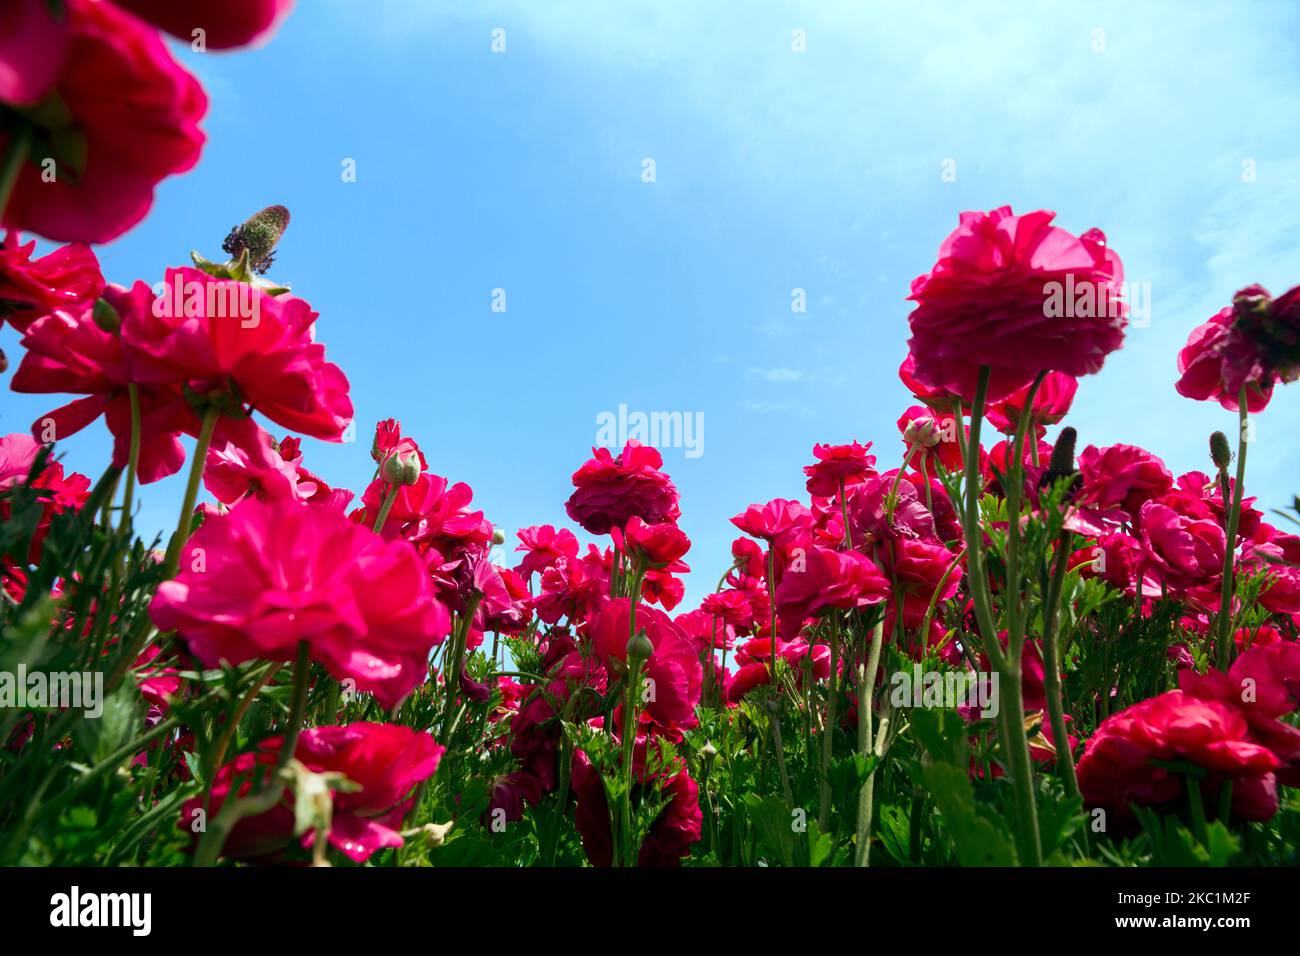 Looking up at blossoming red buttercup flowers in a field in Southern Israel, in front of cloudy blue skies Stock Photo